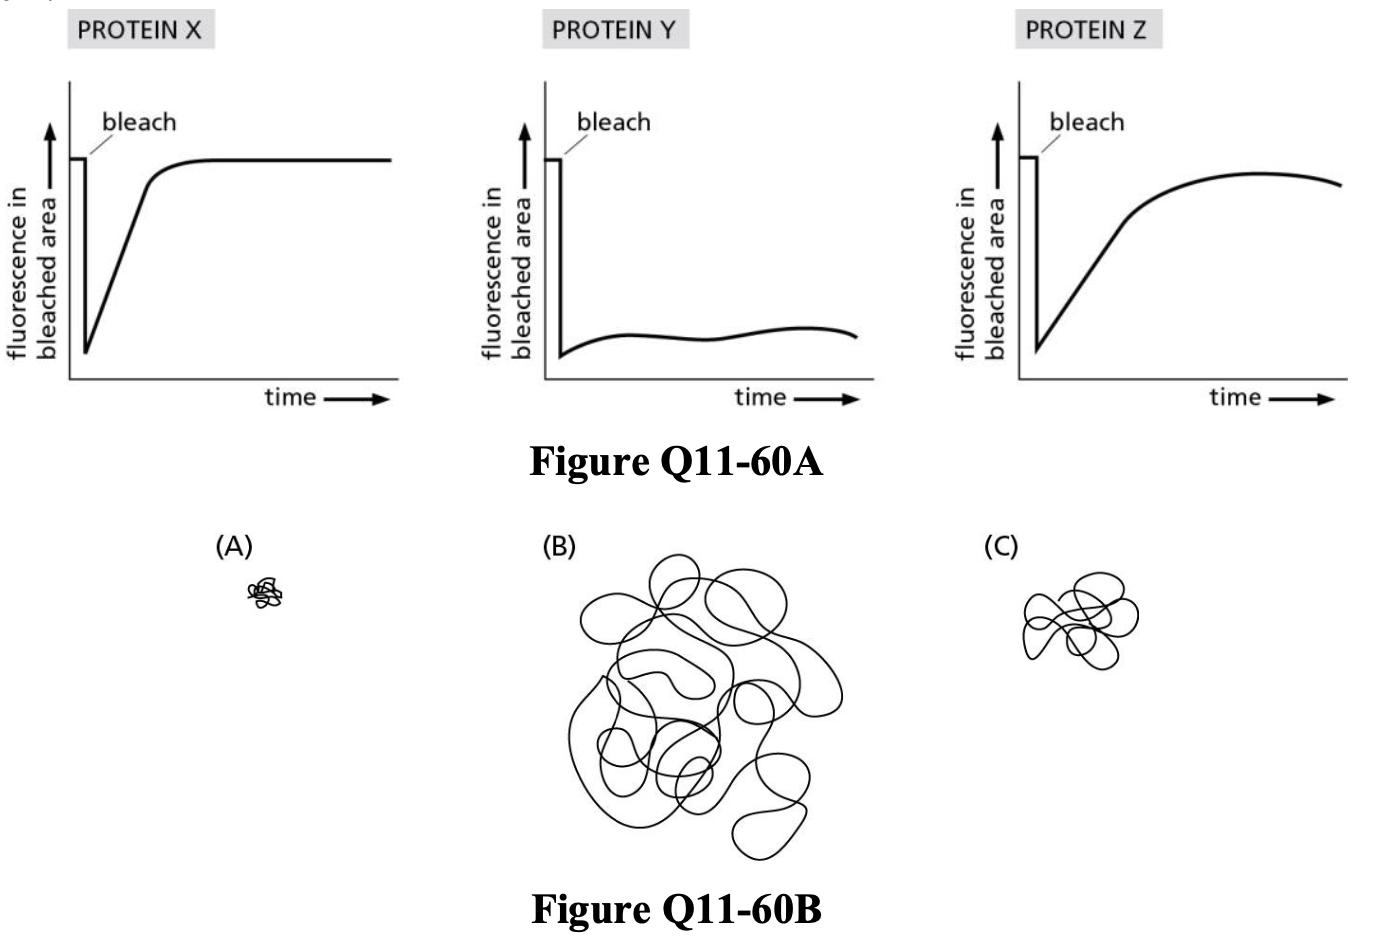 <p>Data for the mobility of three different proteins (X, Y, and Z) using fluorescence recovery after photobleaching (FRAP) are shown in Figure Q11-60A. Separately, single- particle tracking (SPT) data were collected for these samples, as shown in Figure Q11- 60B.</p><ol><li><p>Assign an SPT profile (A, B, or C) to each of these proteins on the basis of the respective FRAP profiles.</p></li><li><p>It is important to remember that in each of these experiments, the results reflect a real, physical difference in the way in which these proteins are situated in the plasma membrane. Provide a plausible explanation for the differences observed in proteins X, Y, and Z.</p></li></ol>